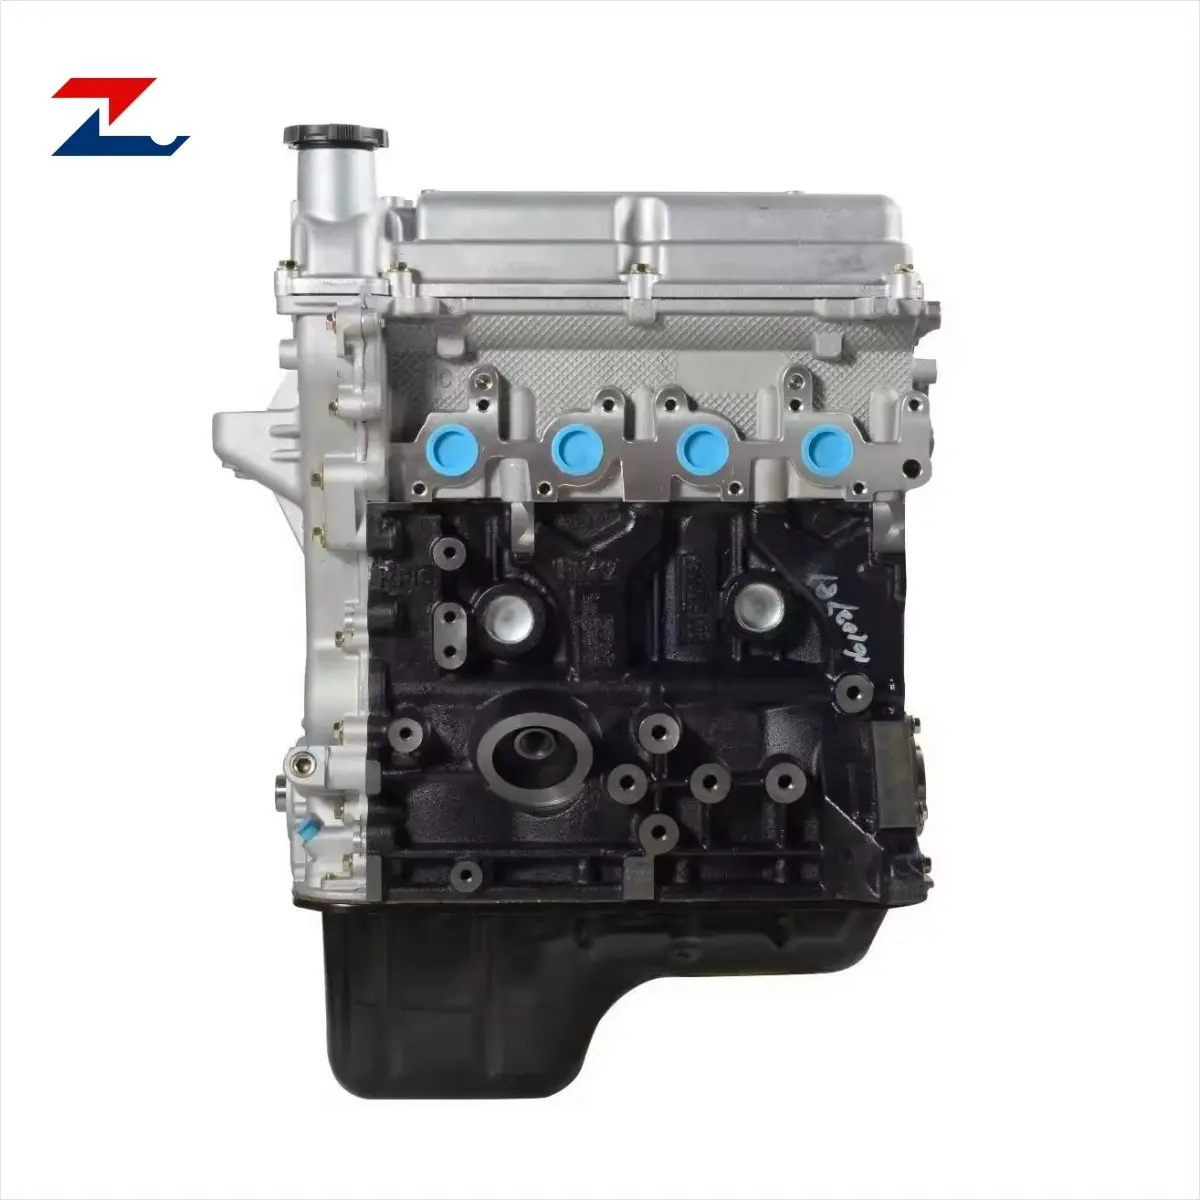 ZMC All new Chevrolet engine B12D1 1.2L 62 KW 114 Nm 4 Cylinders Auto Engine for Chevrolet Spark M300 in 2009-2015